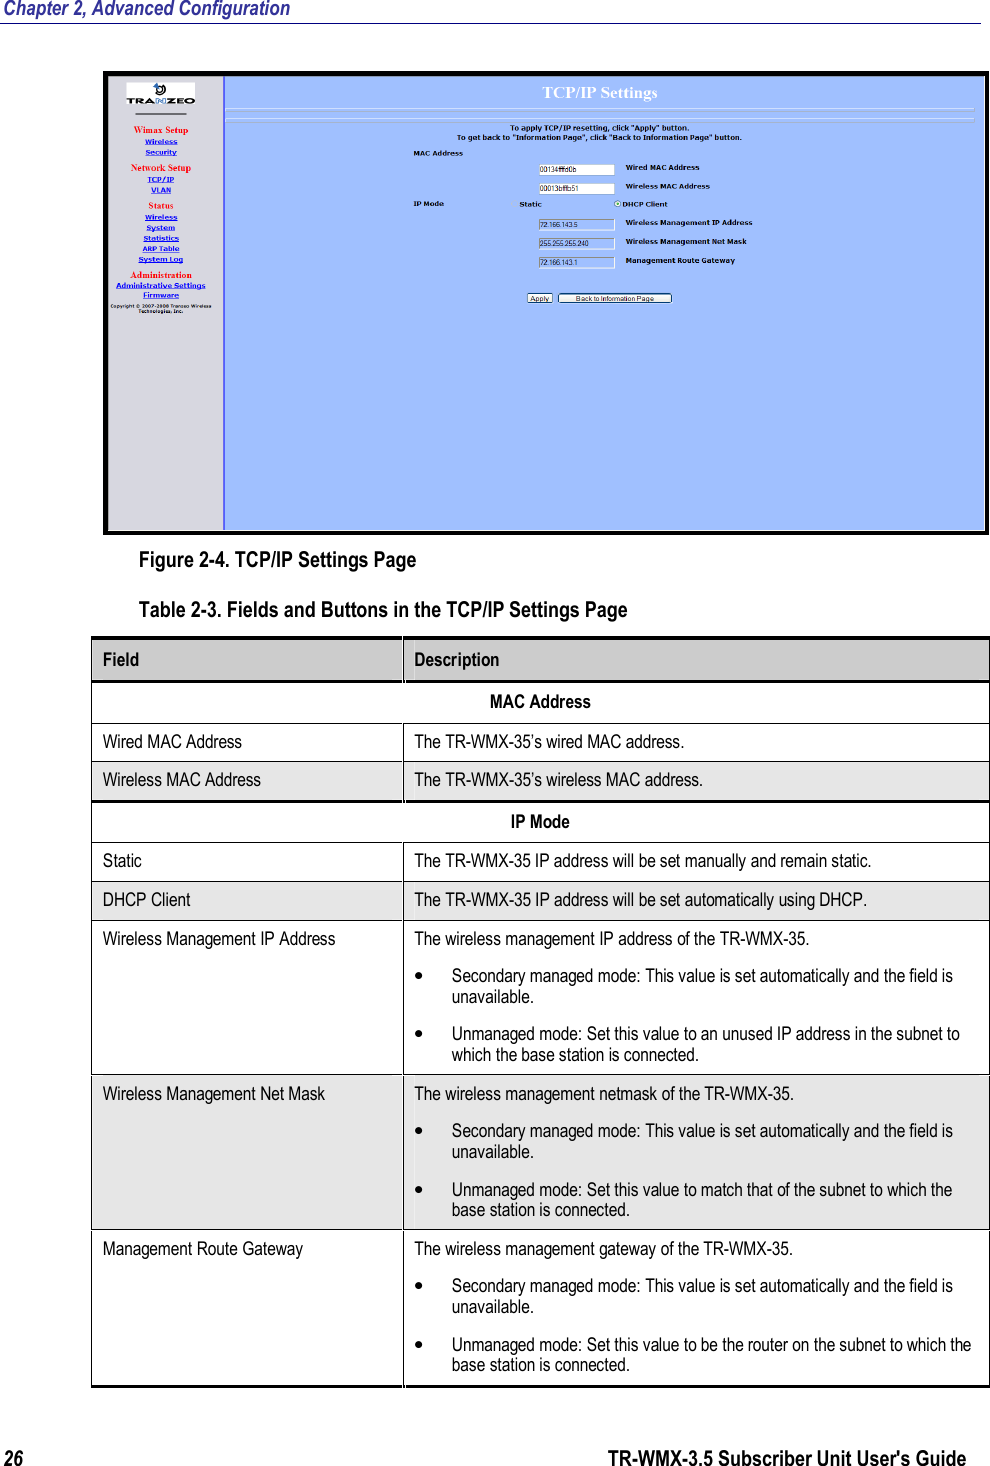 Chapter 2, Advanced Configuration 26                      TR-WMX-3.5 Subscriber Unit User&apos;s Guide   Figure 2-4. TCP/IP Settings Page Table 2-3. Fields and Buttons in the TCP/IP Settings Page Field  Description MAC Address Wired MAC Address  The TR-WMX-35’s wired MAC address. Wireless MAC Address  The TR-WMX-35’s wireless MAC address. IP Mode Static  The TR-WMX-35 IP address will be set manually and remain static. DHCP Client  The TR-WMX-35 IP address will be set automatically using DHCP. Wireless Management IP Address  The wireless management IP address of the TR-WMX-35. • Secondary managed mode: This value is set automatically and the field is unavailable.  • Unmanaged mode: Set this value to an unused IP address in the subnet to which the base station is connected. Wireless Management Net Mask  The wireless management netmask of the TR-WMX-35. • Secondary managed mode: This value is set automatically and the field is unavailable. • Unmanaged mode: Set this value to match that of the subnet to which the base station is connected. Management Route Gateway  The wireless management gateway of the TR-WMX-35. • Secondary managed mode: This value is set automatically and the field is unavailable. • Unmanaged mode: Set this value to be the router on the subnet to which the base station is connected.  